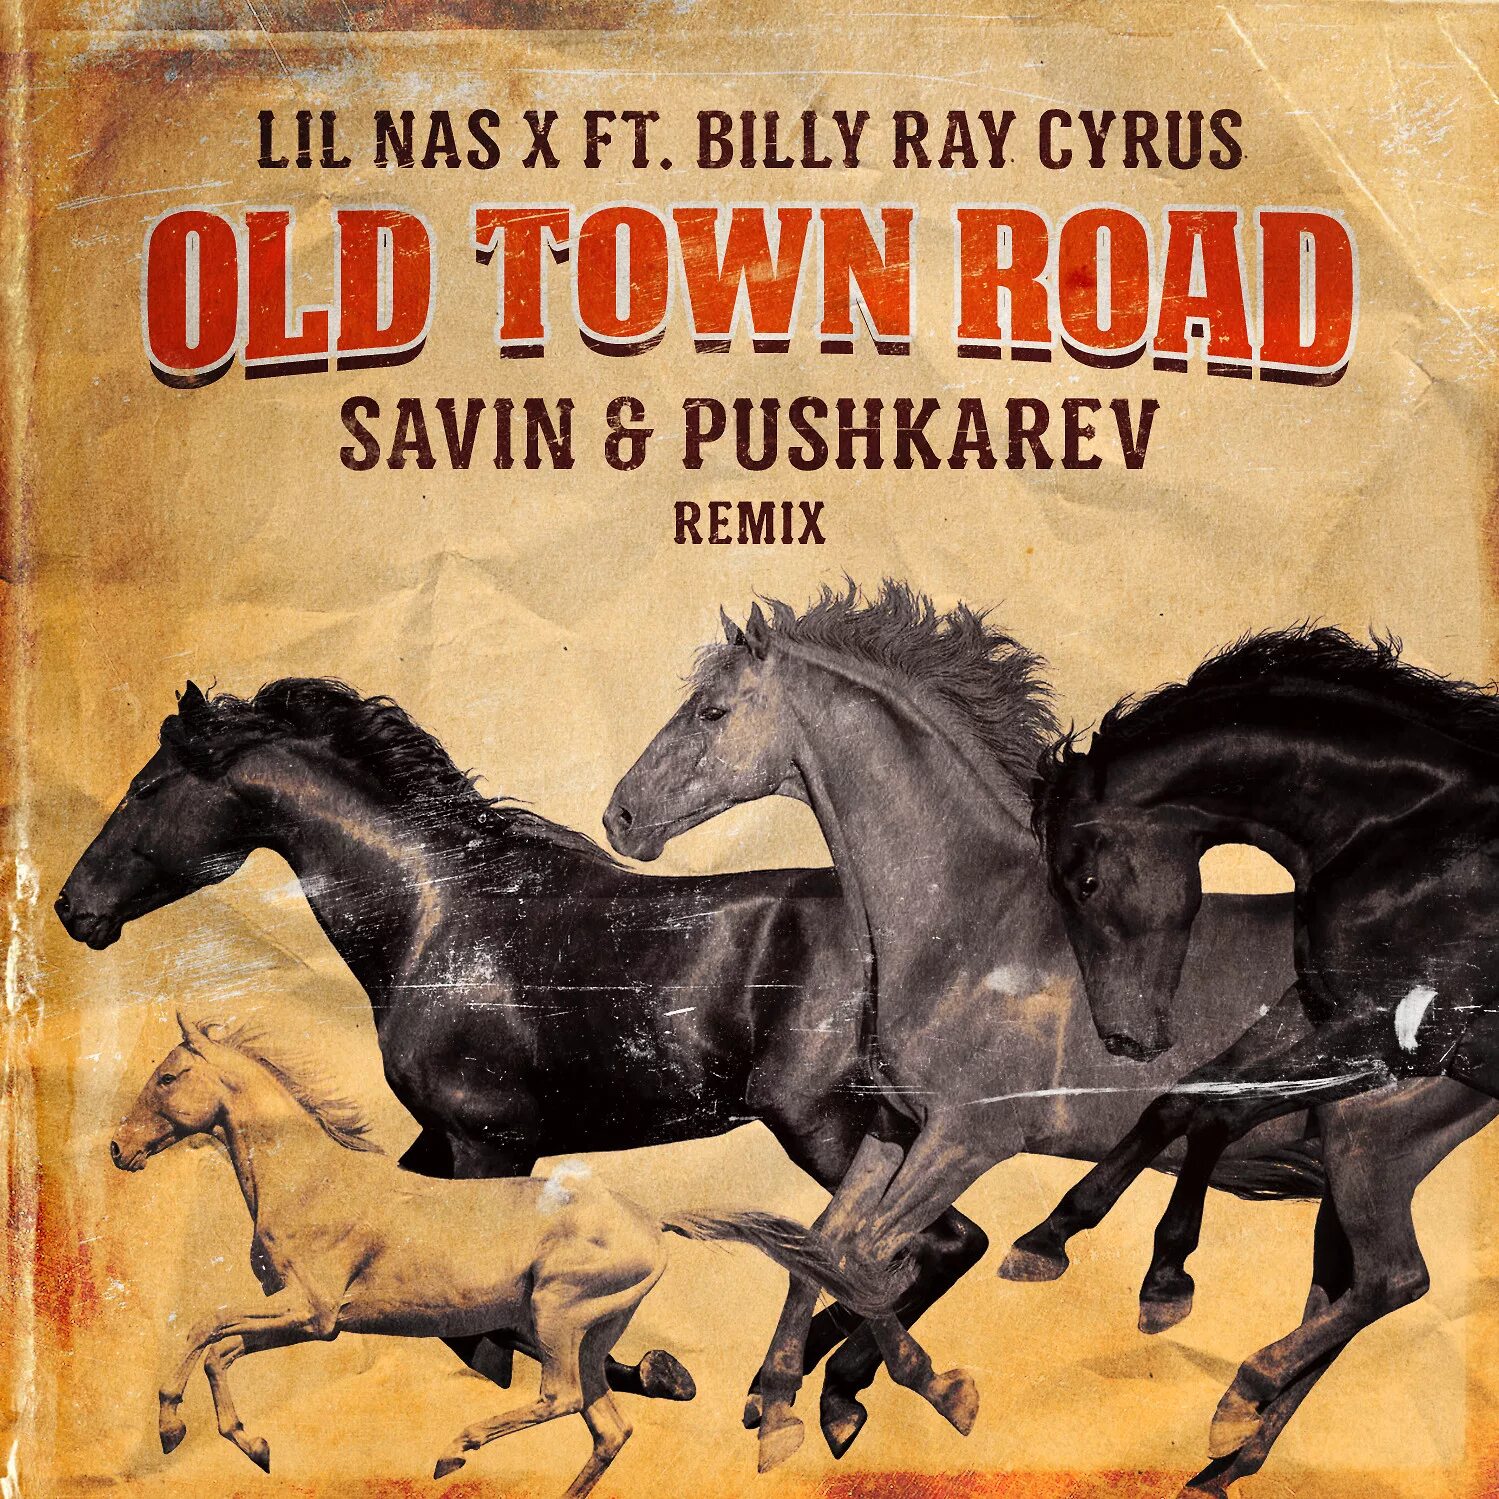 Lil nas x - old Town Road ft. Billy ray Cyrus. Old Town Road Lil nas x Billy ray Cyrus обложка. Lil nas x old Town Road обложка.